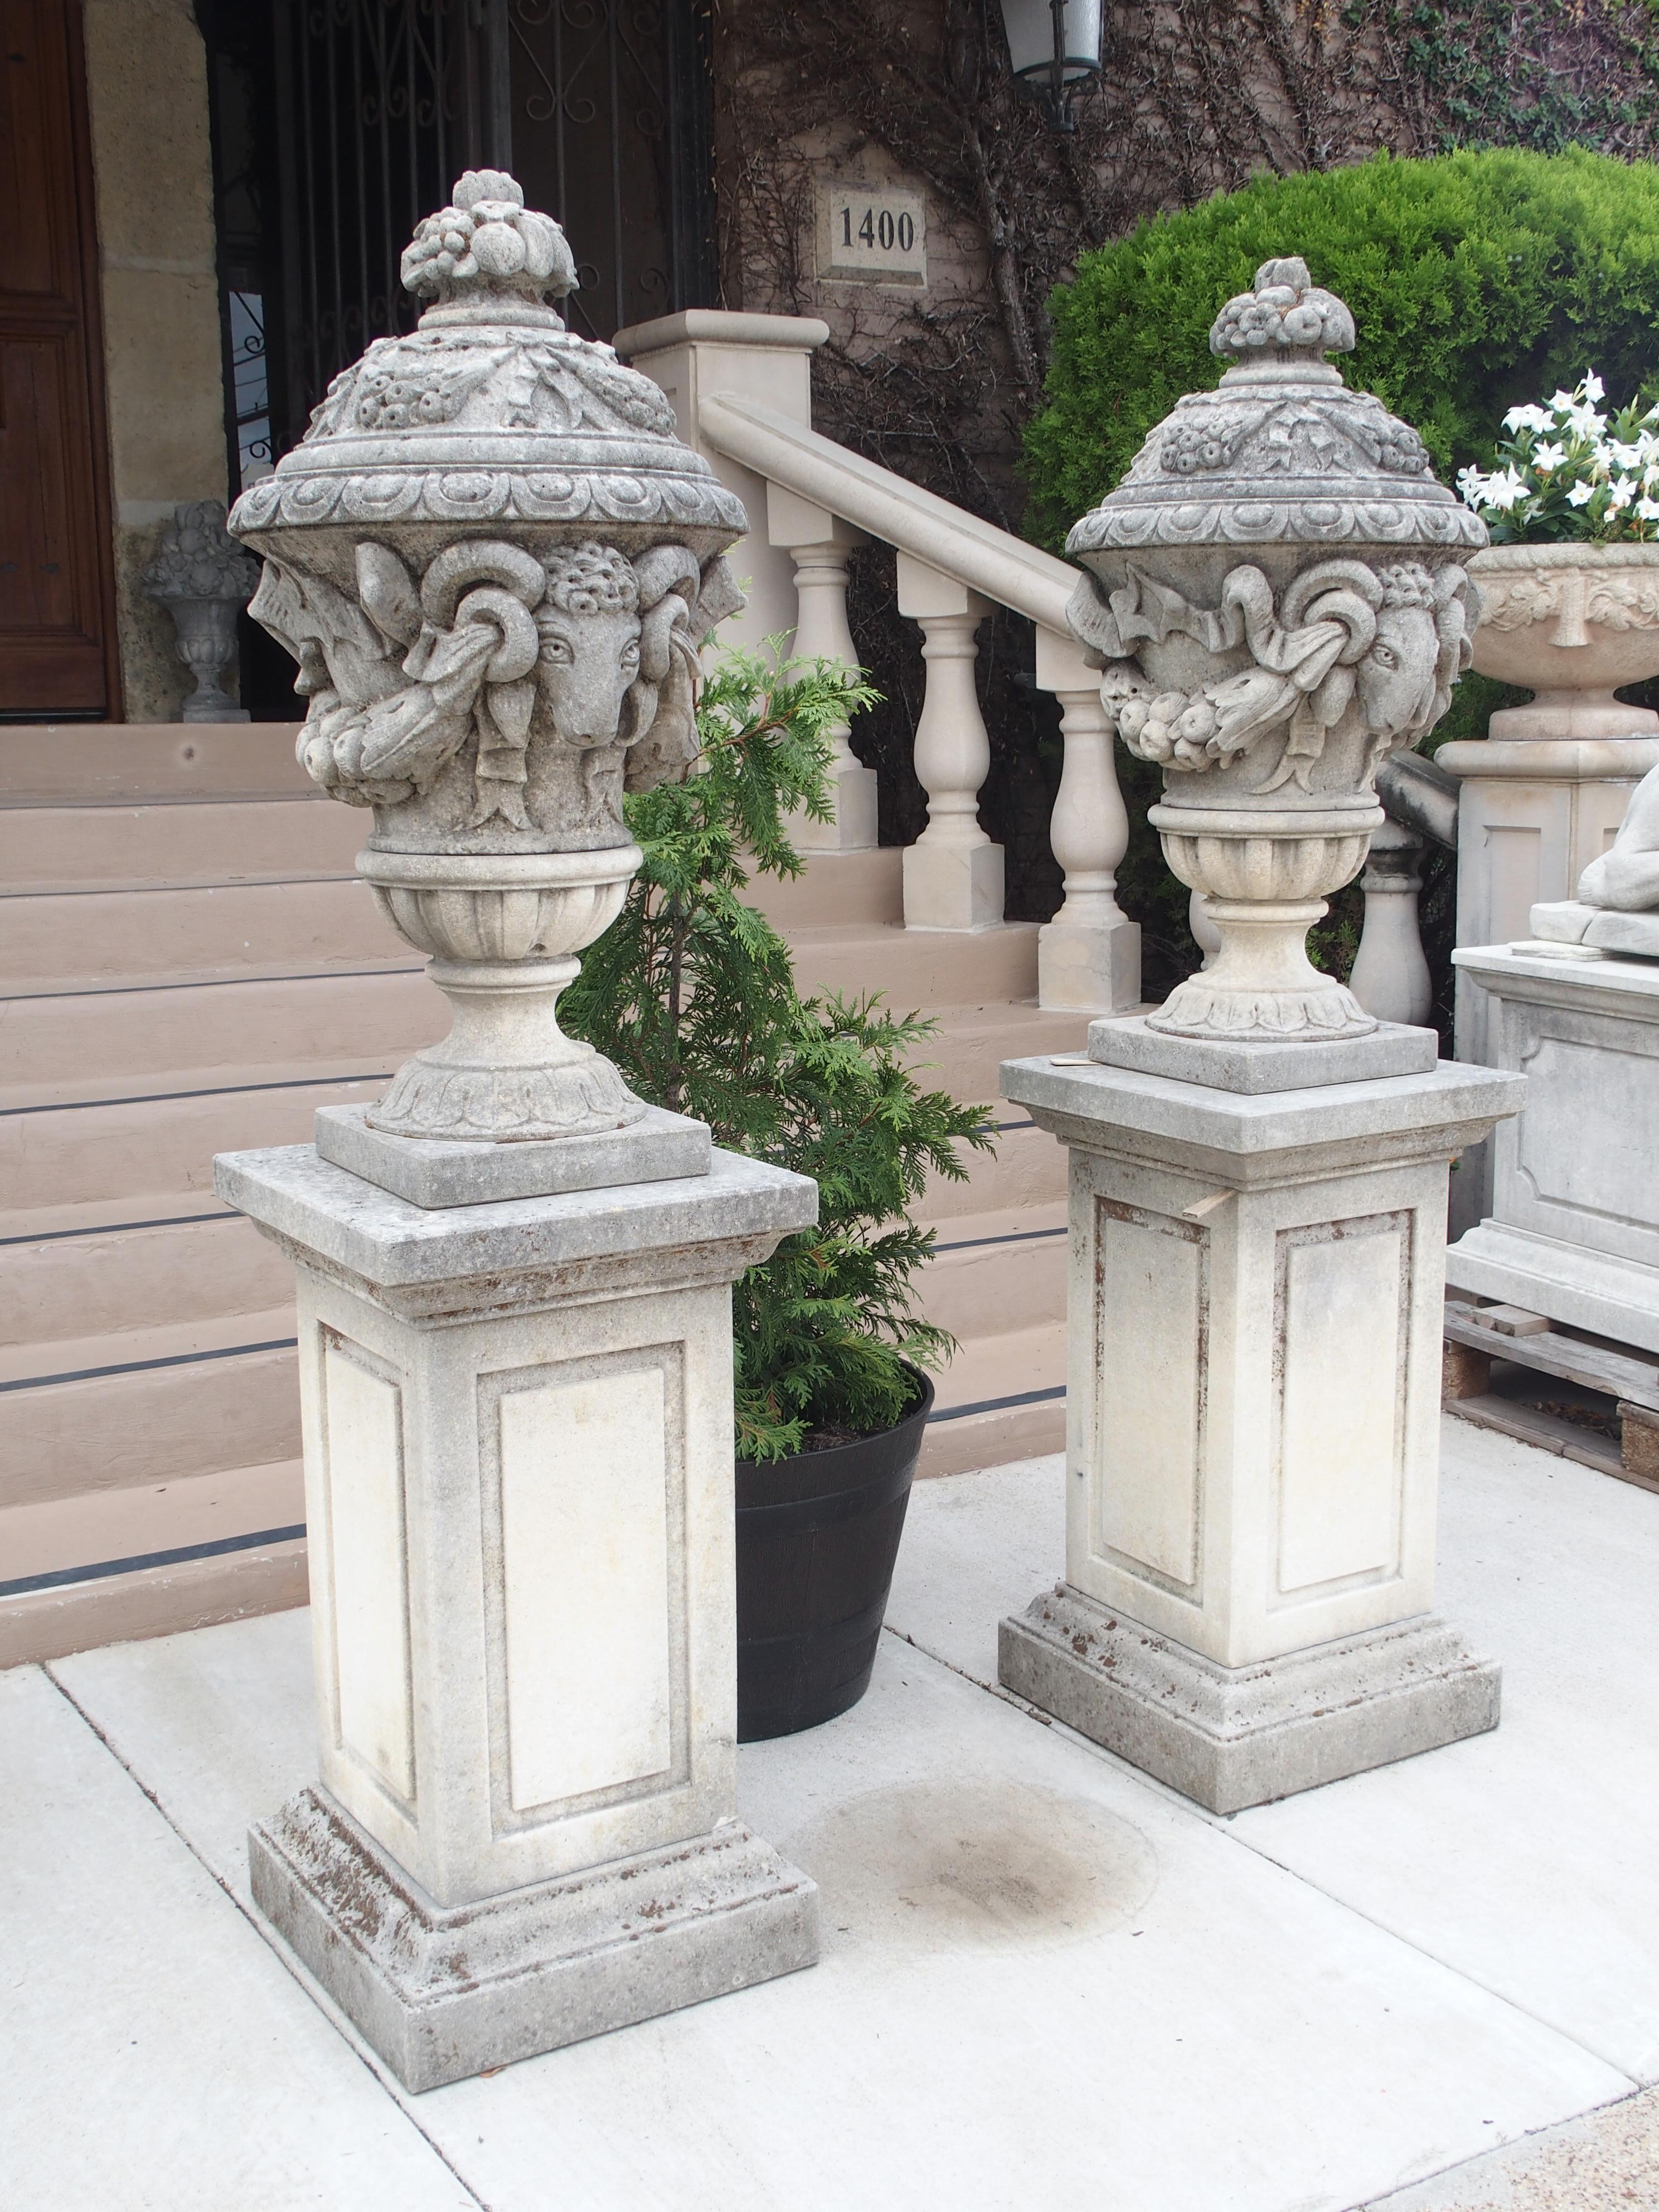 Made from individually carved pieces of Italian limestone, this pair of rams’ heads vases on pedestals make quite an impression. The intricacies of each carving indicate that a true master carved these.

Each vase is topped by a fruit and floral